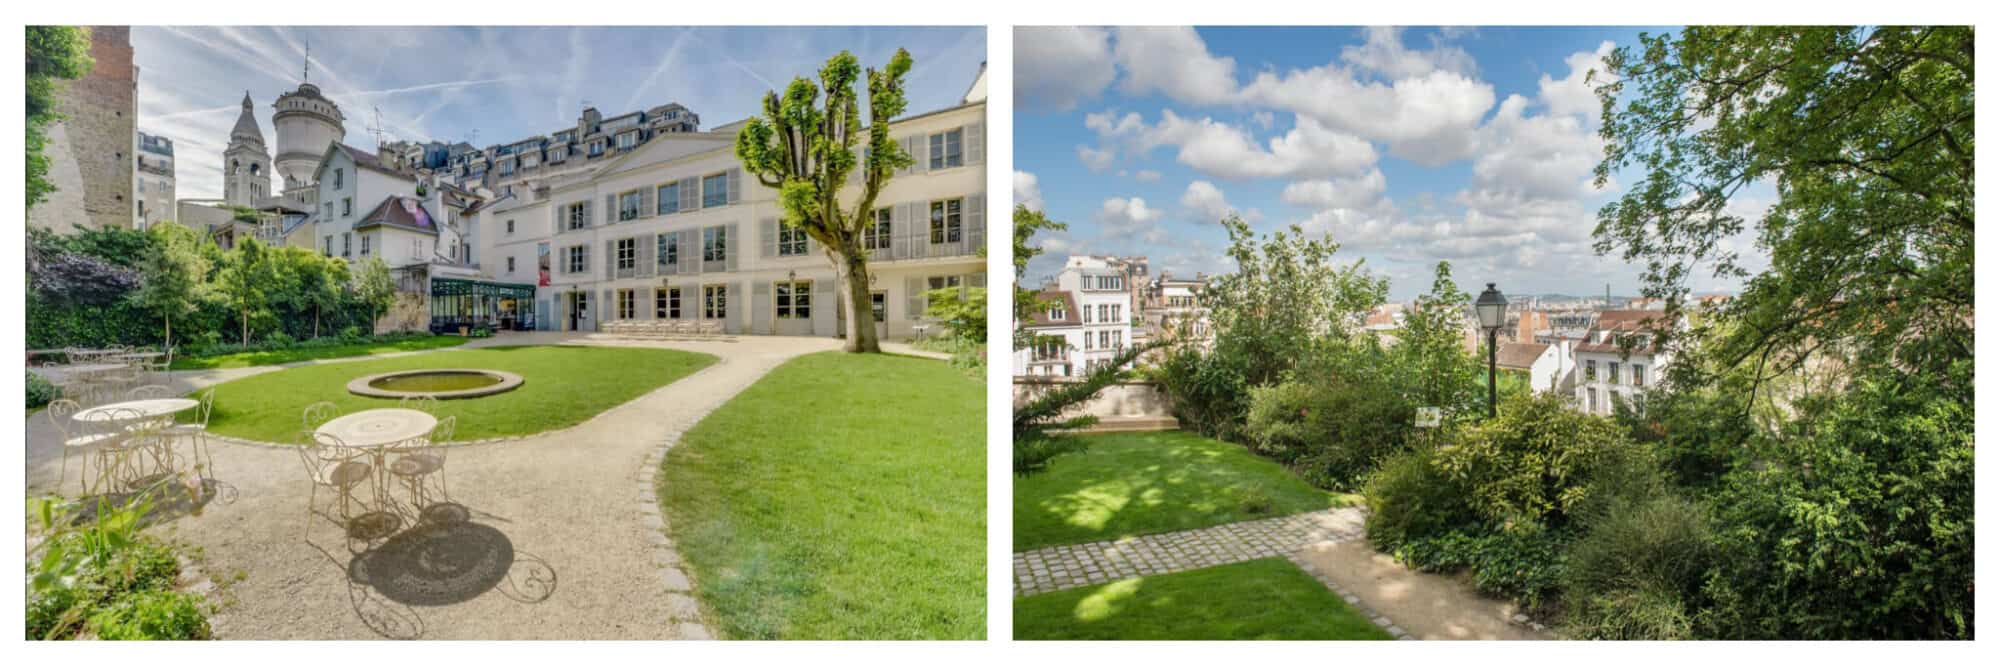 Left and right, the garden of the Musée Montmartre in Paris, featuring the oldest house in the area.